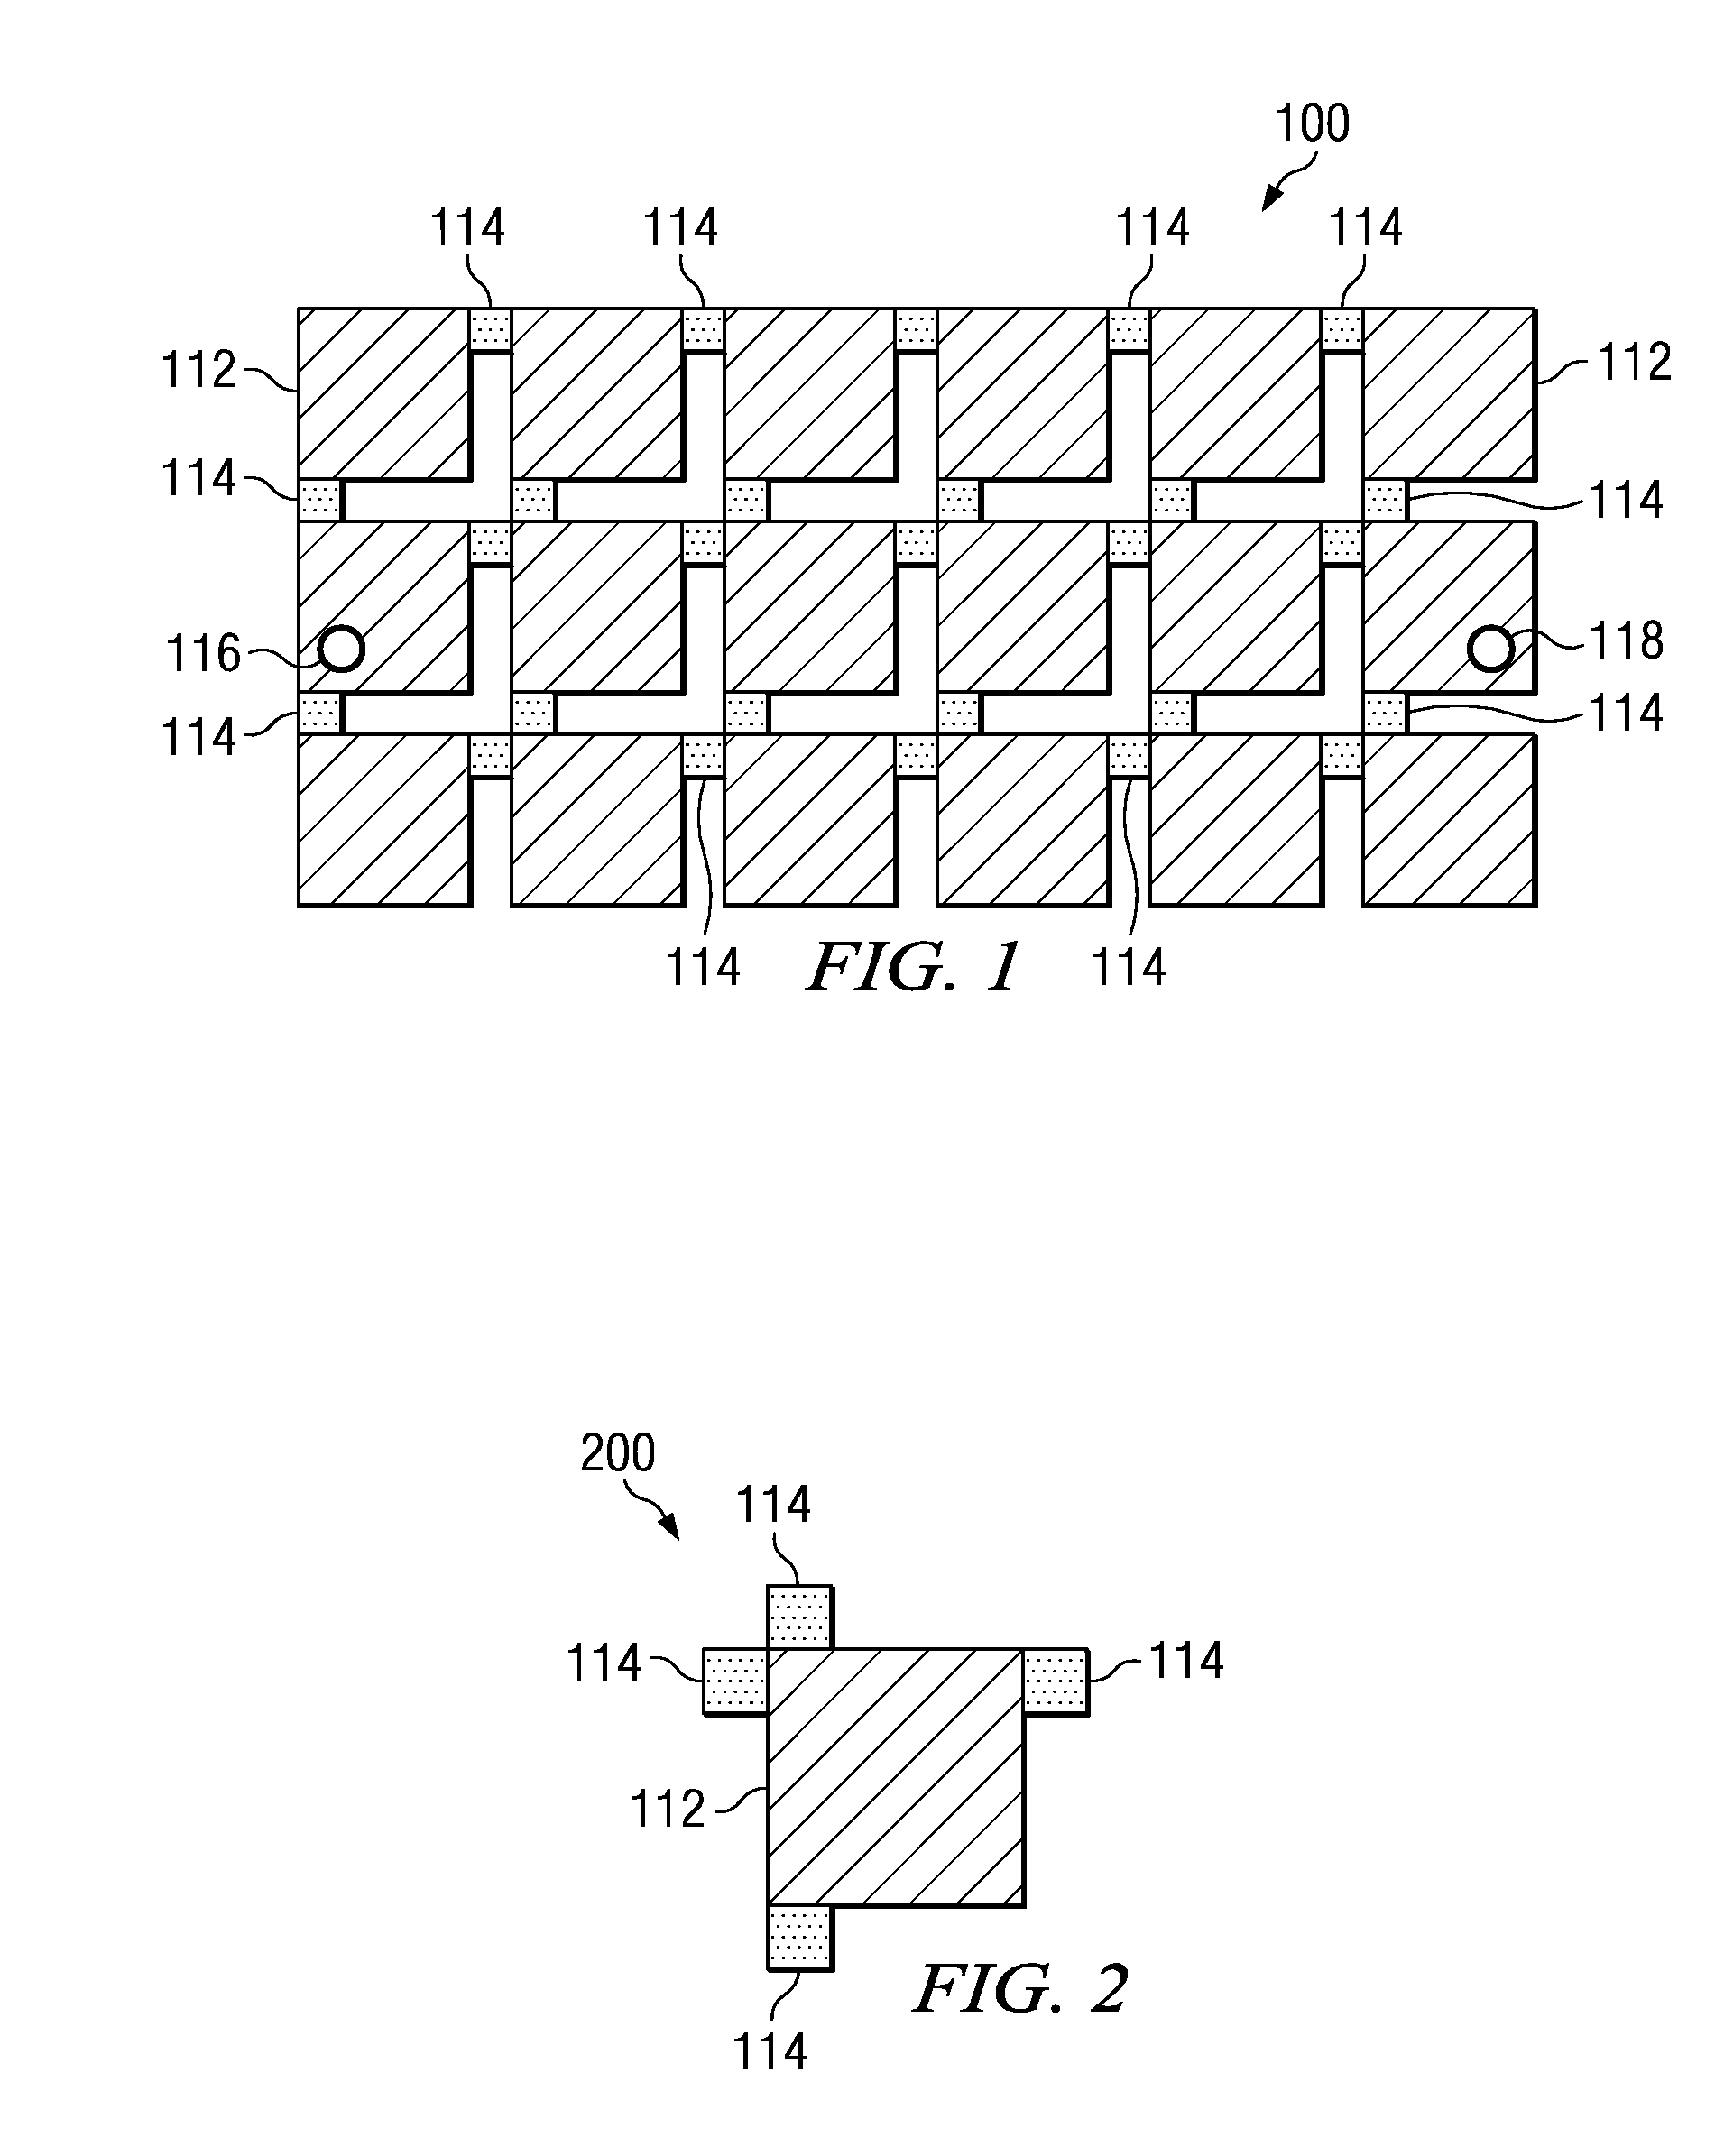 Method for Ultimate Noise Isolation in High-Speed Digital Systems on Packages and Printed Circuit Boards (PCBS)